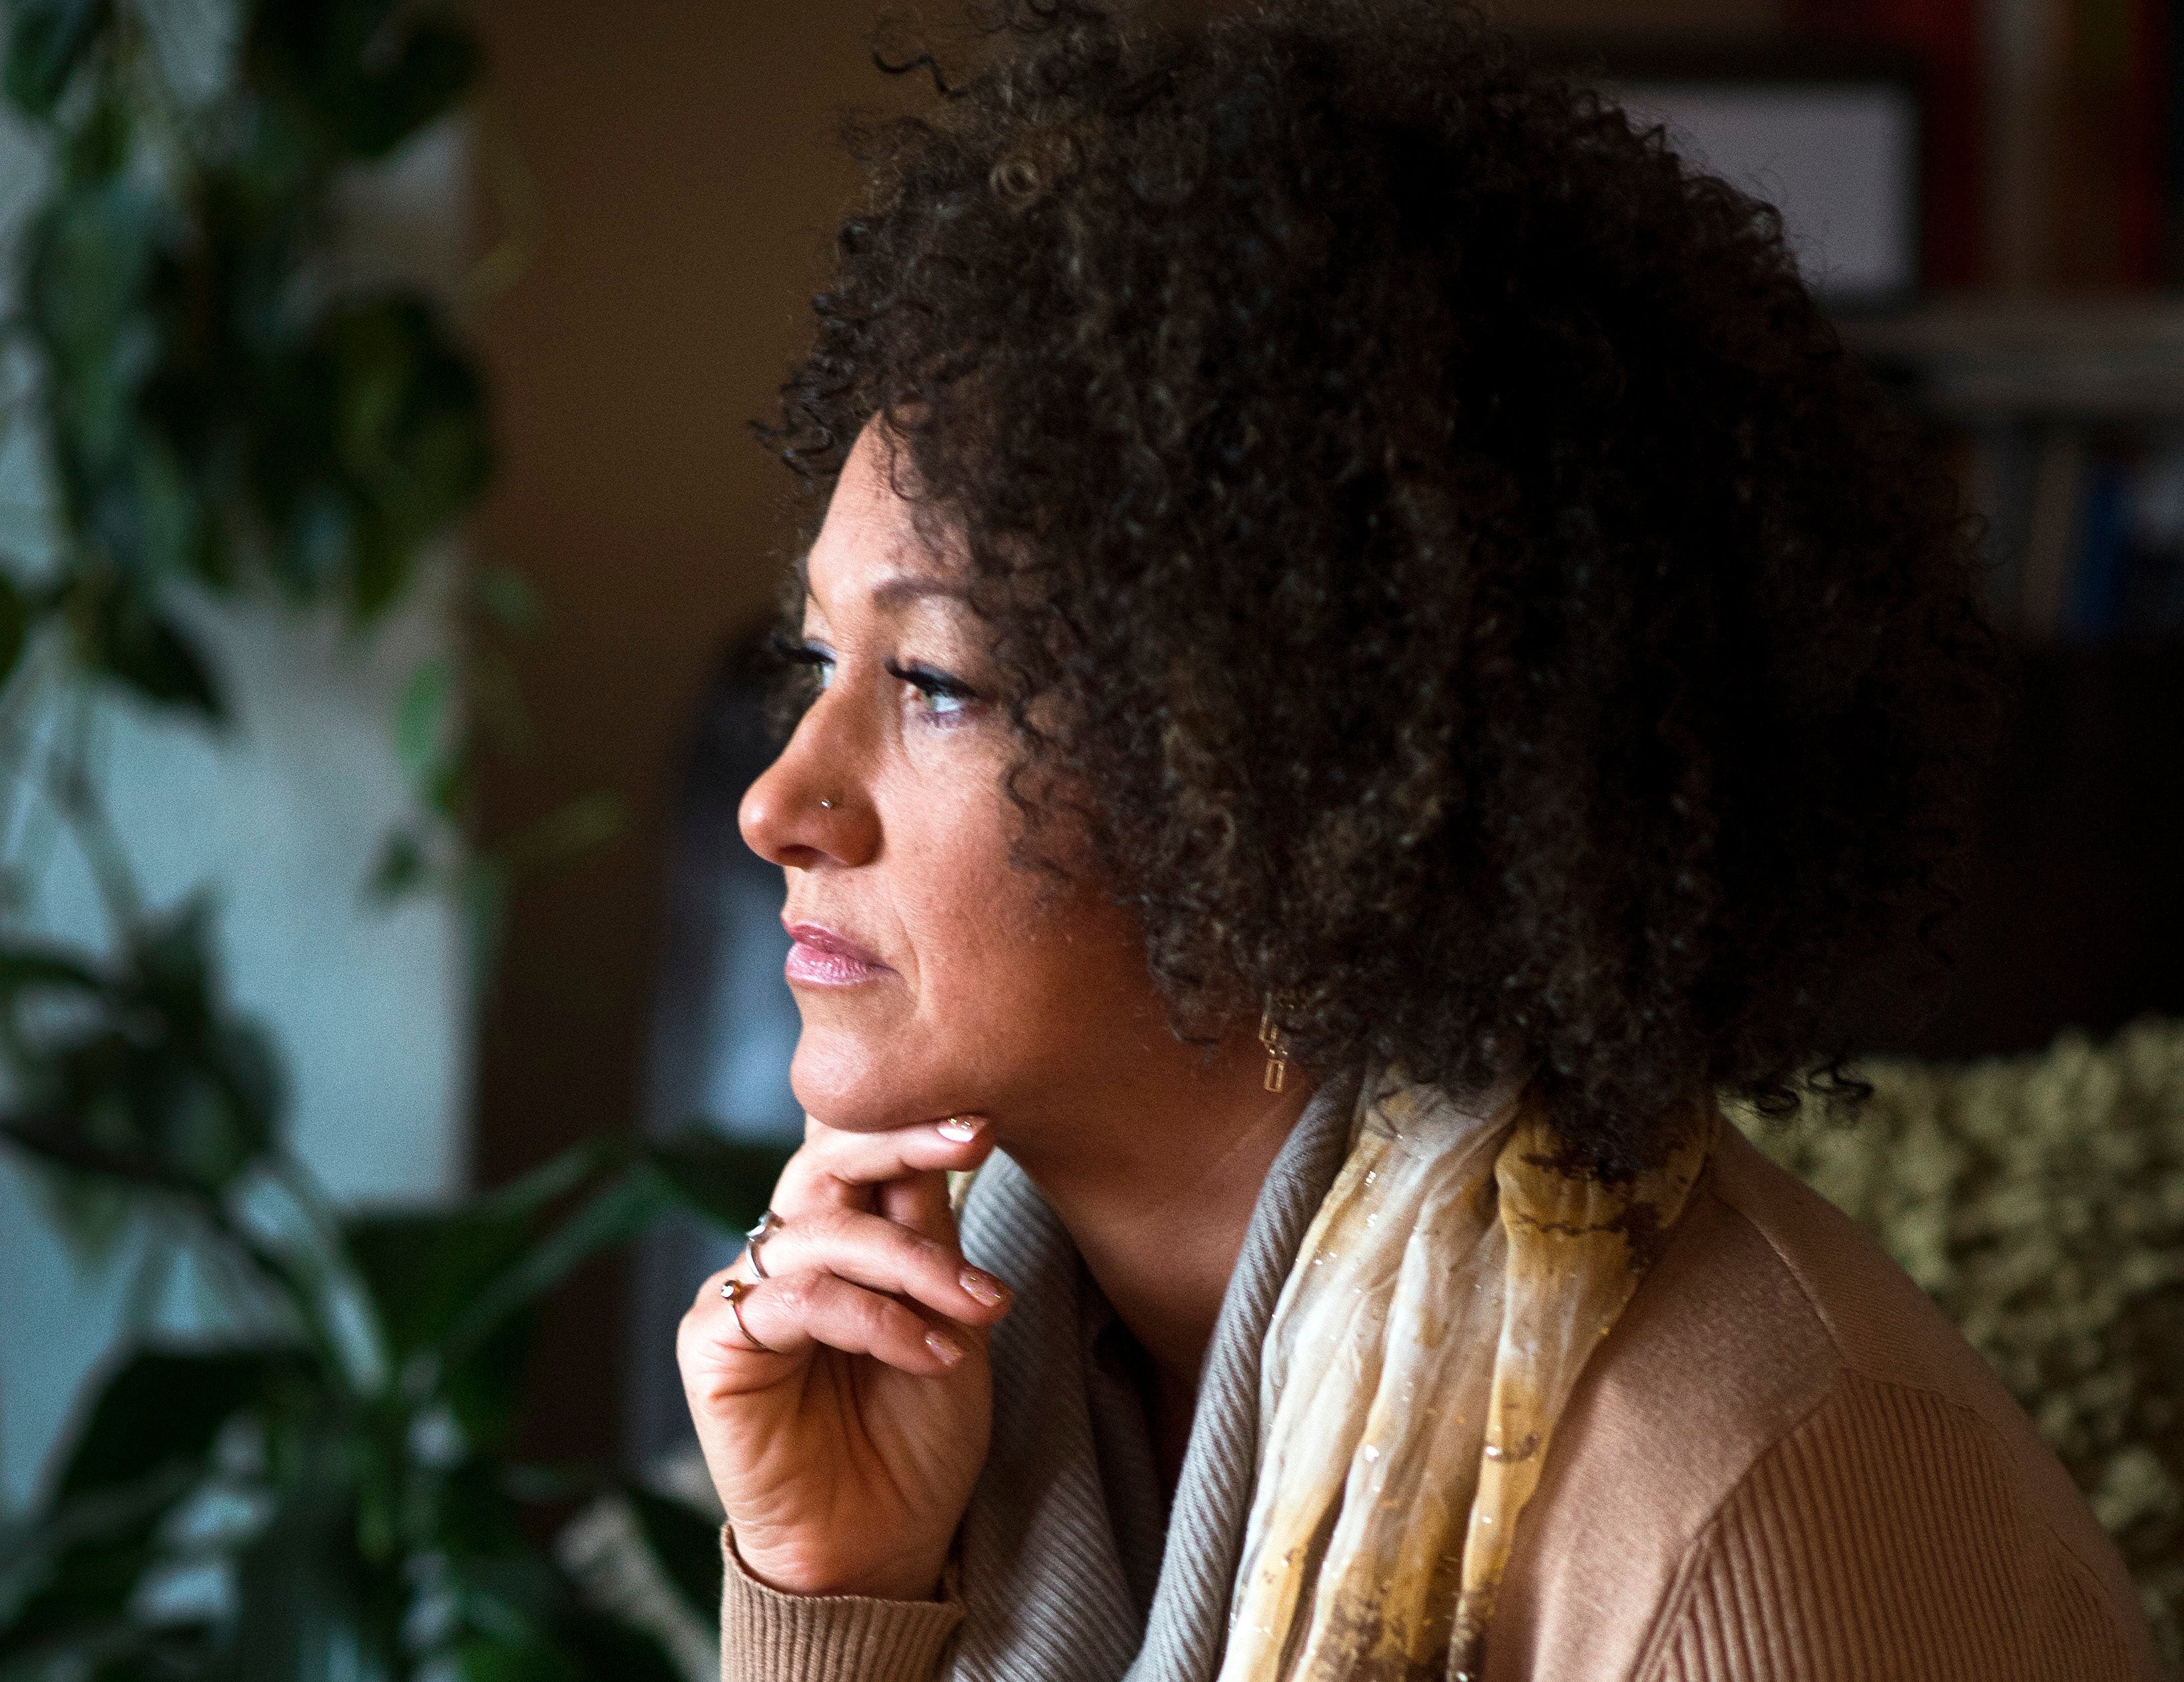 Rachel Dolezal Has Been Booked And Released From Jail Over Welfare Fraud Charges